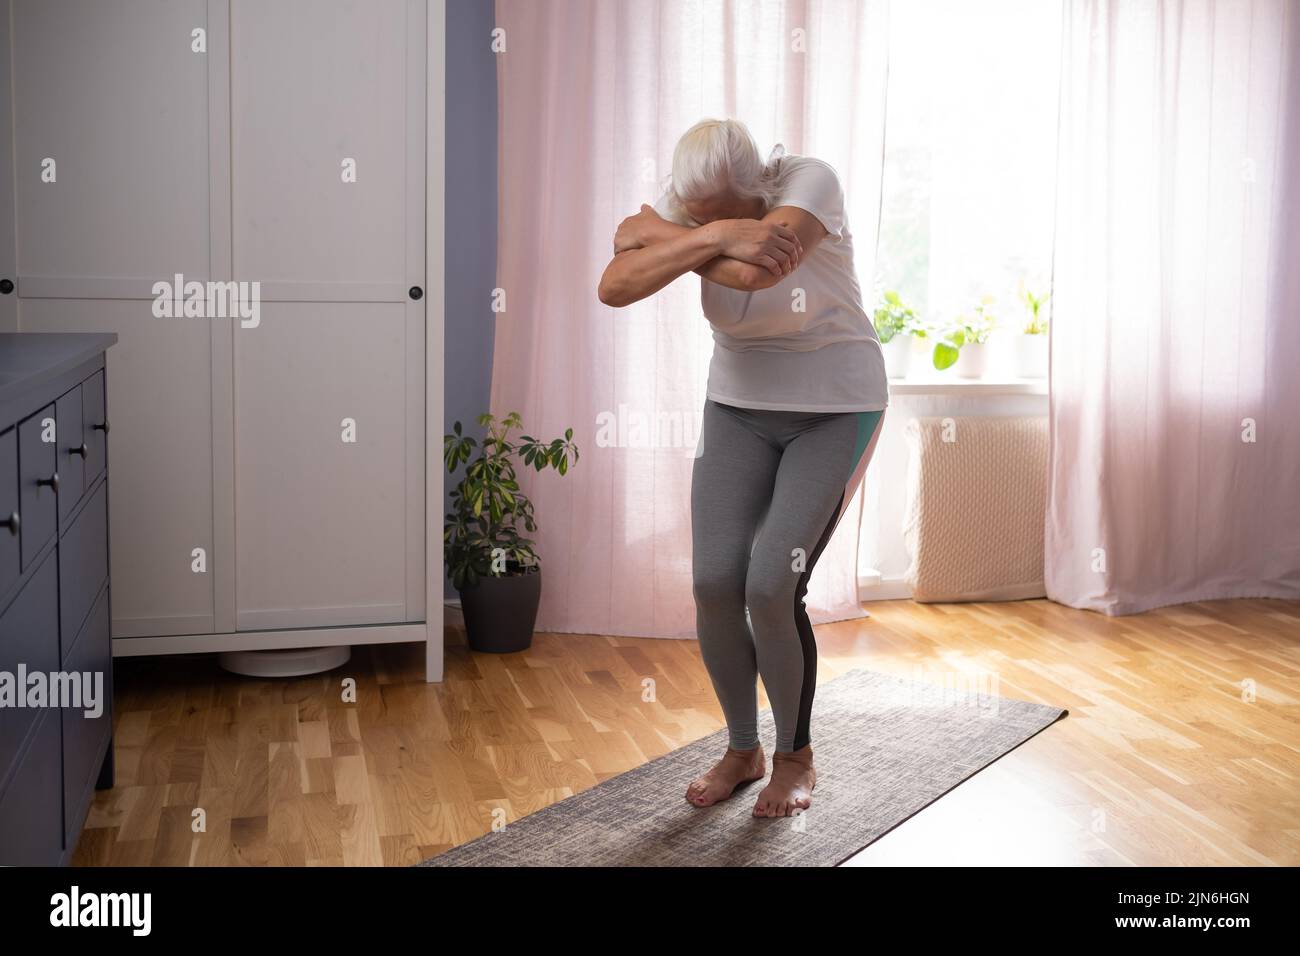 Senior woman working out indoors stretching muscles. Healthy lifestyle at old age. Stock Photo